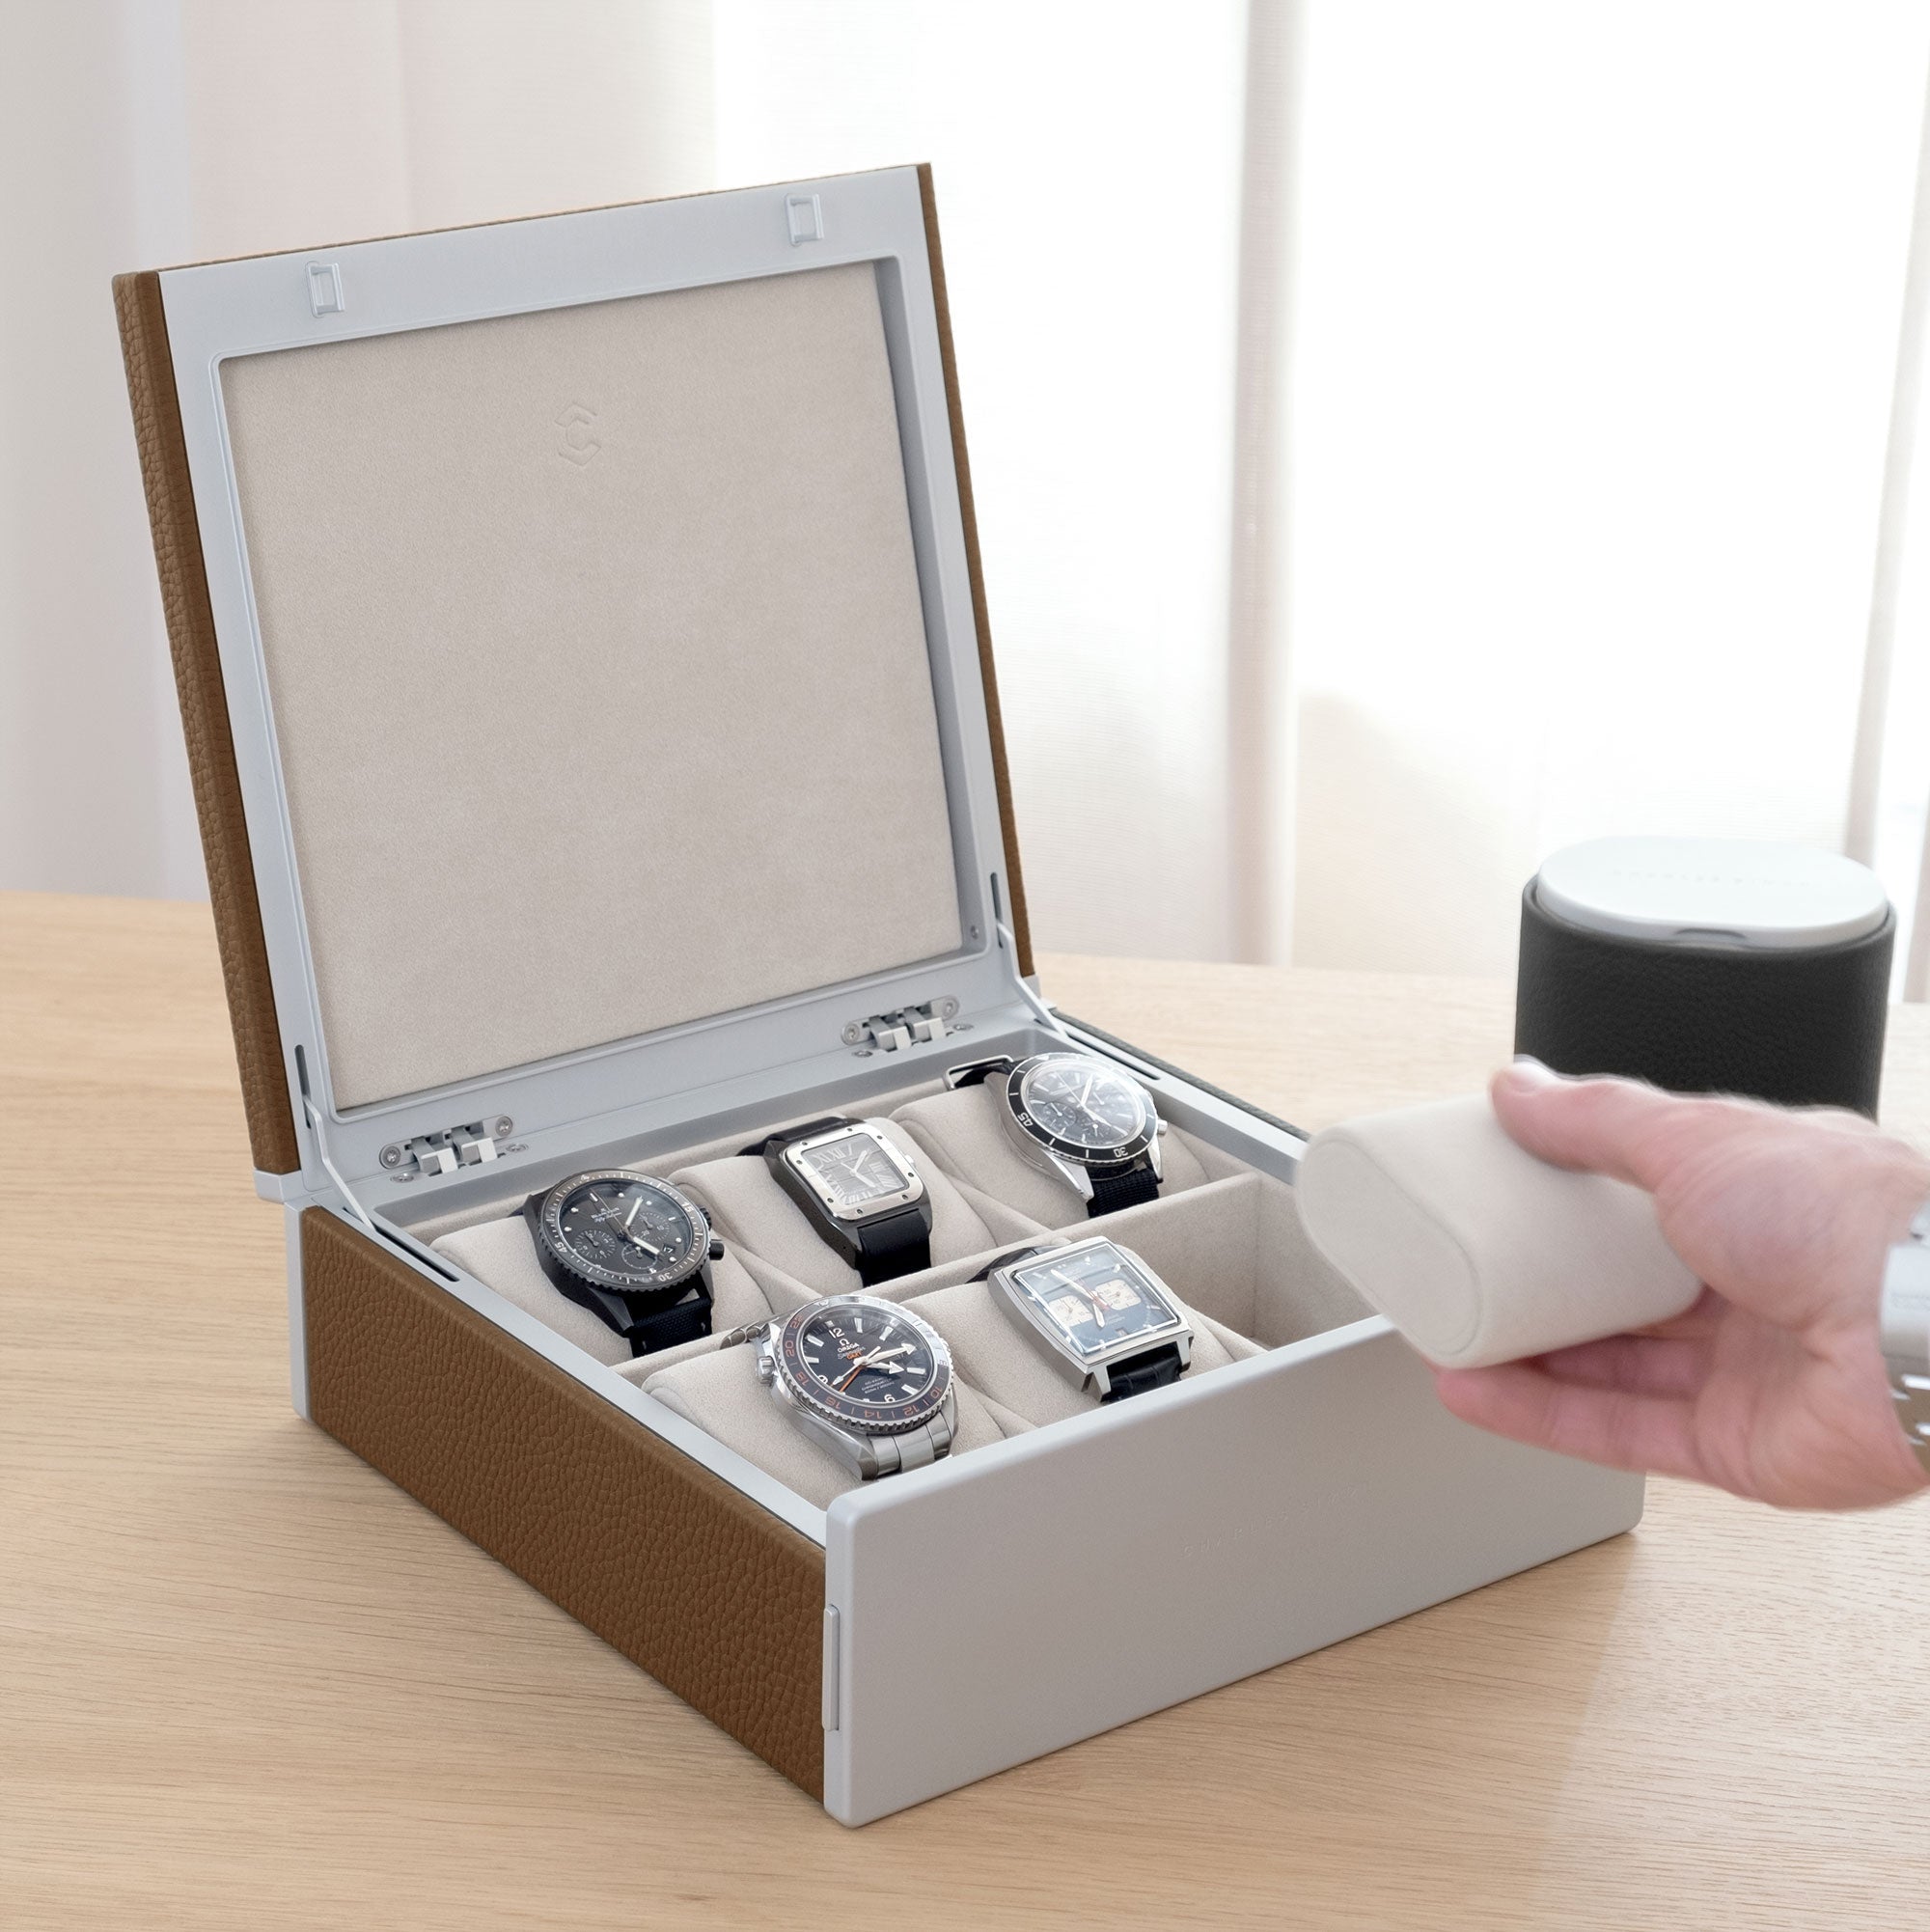 Luxury watch box for 6 watches made from tan leather, carbon fiber and anodized aluminum casing and Alcantara interior. Gentleman is grabbing removable Alcantara from handmade watch box placed in elegant environment. Watch box is filled with 5 men's luxury watches including Cartier, Rolex, Omega, Jaeger Lecoultre. 